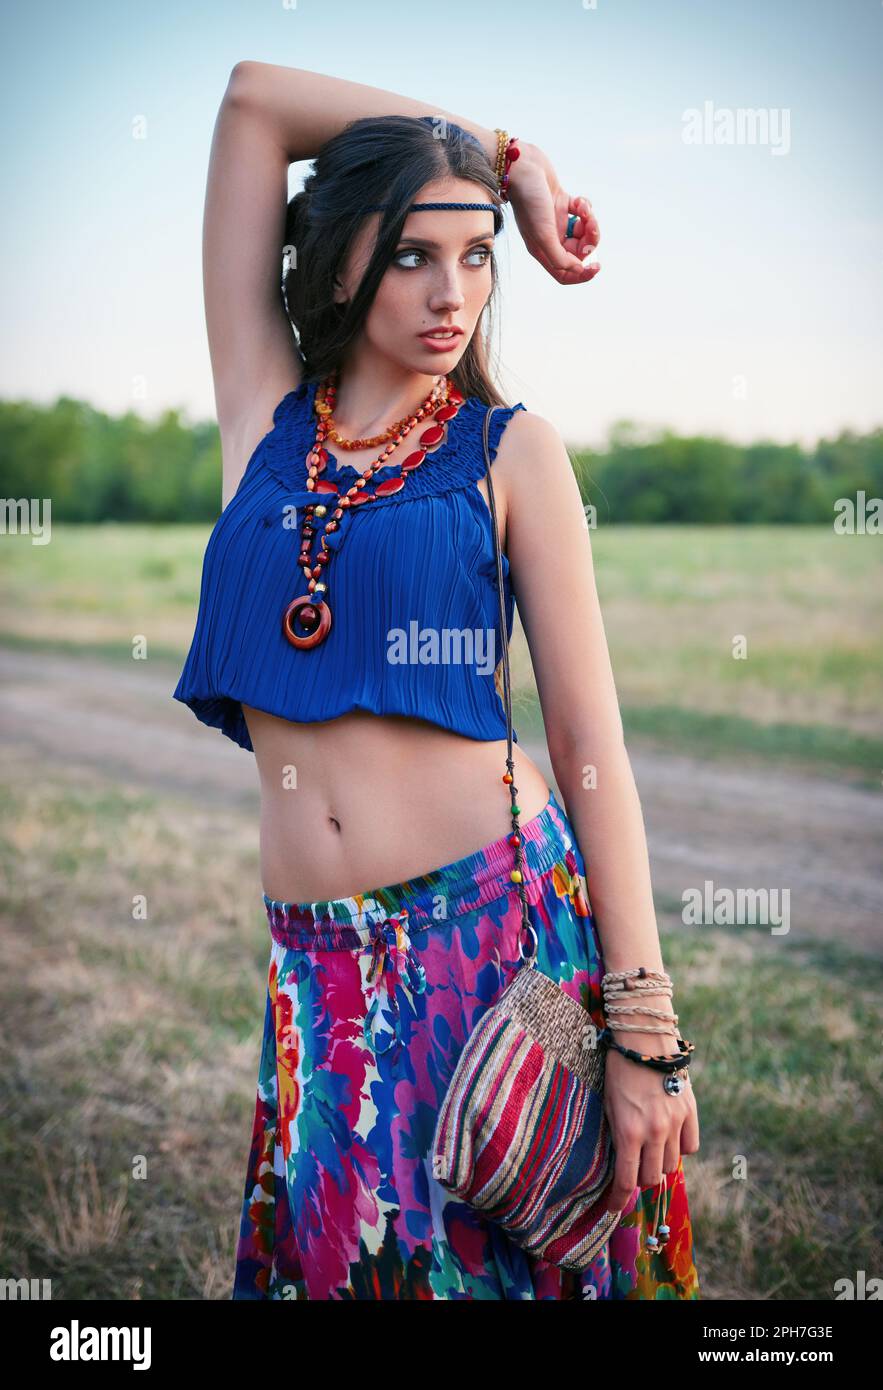 Outdoor portrait of the attractive young boho (hippie) girl in field Stock Photo